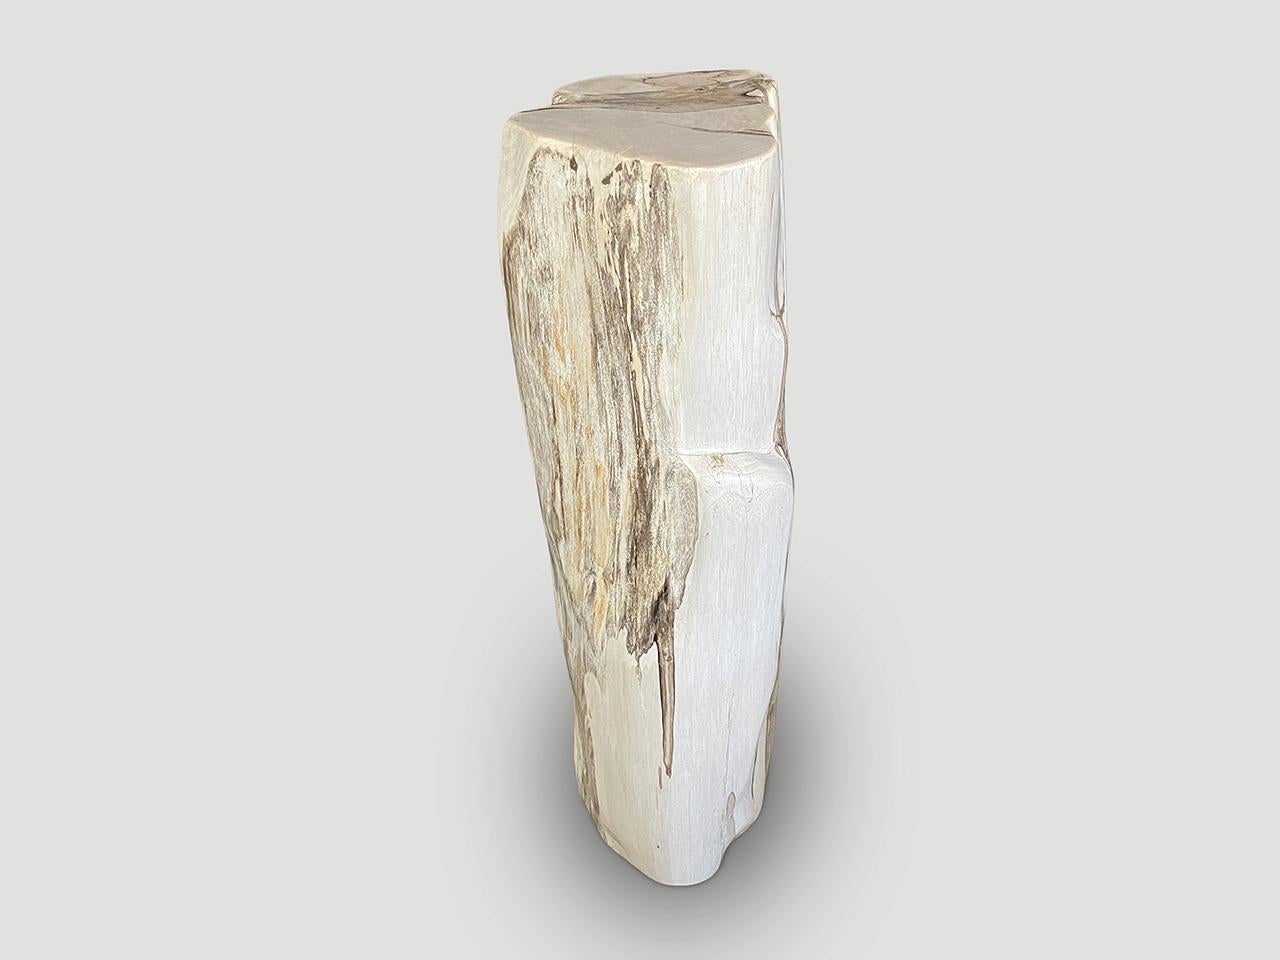 Beautiful neutral tones on this high quality petrified wood pedestal. It’s fascinating how Mother Nature produces these stunning 40 million year old petrified teak logs with such contrasting colors and natural patterns throughout. Modern yet with so